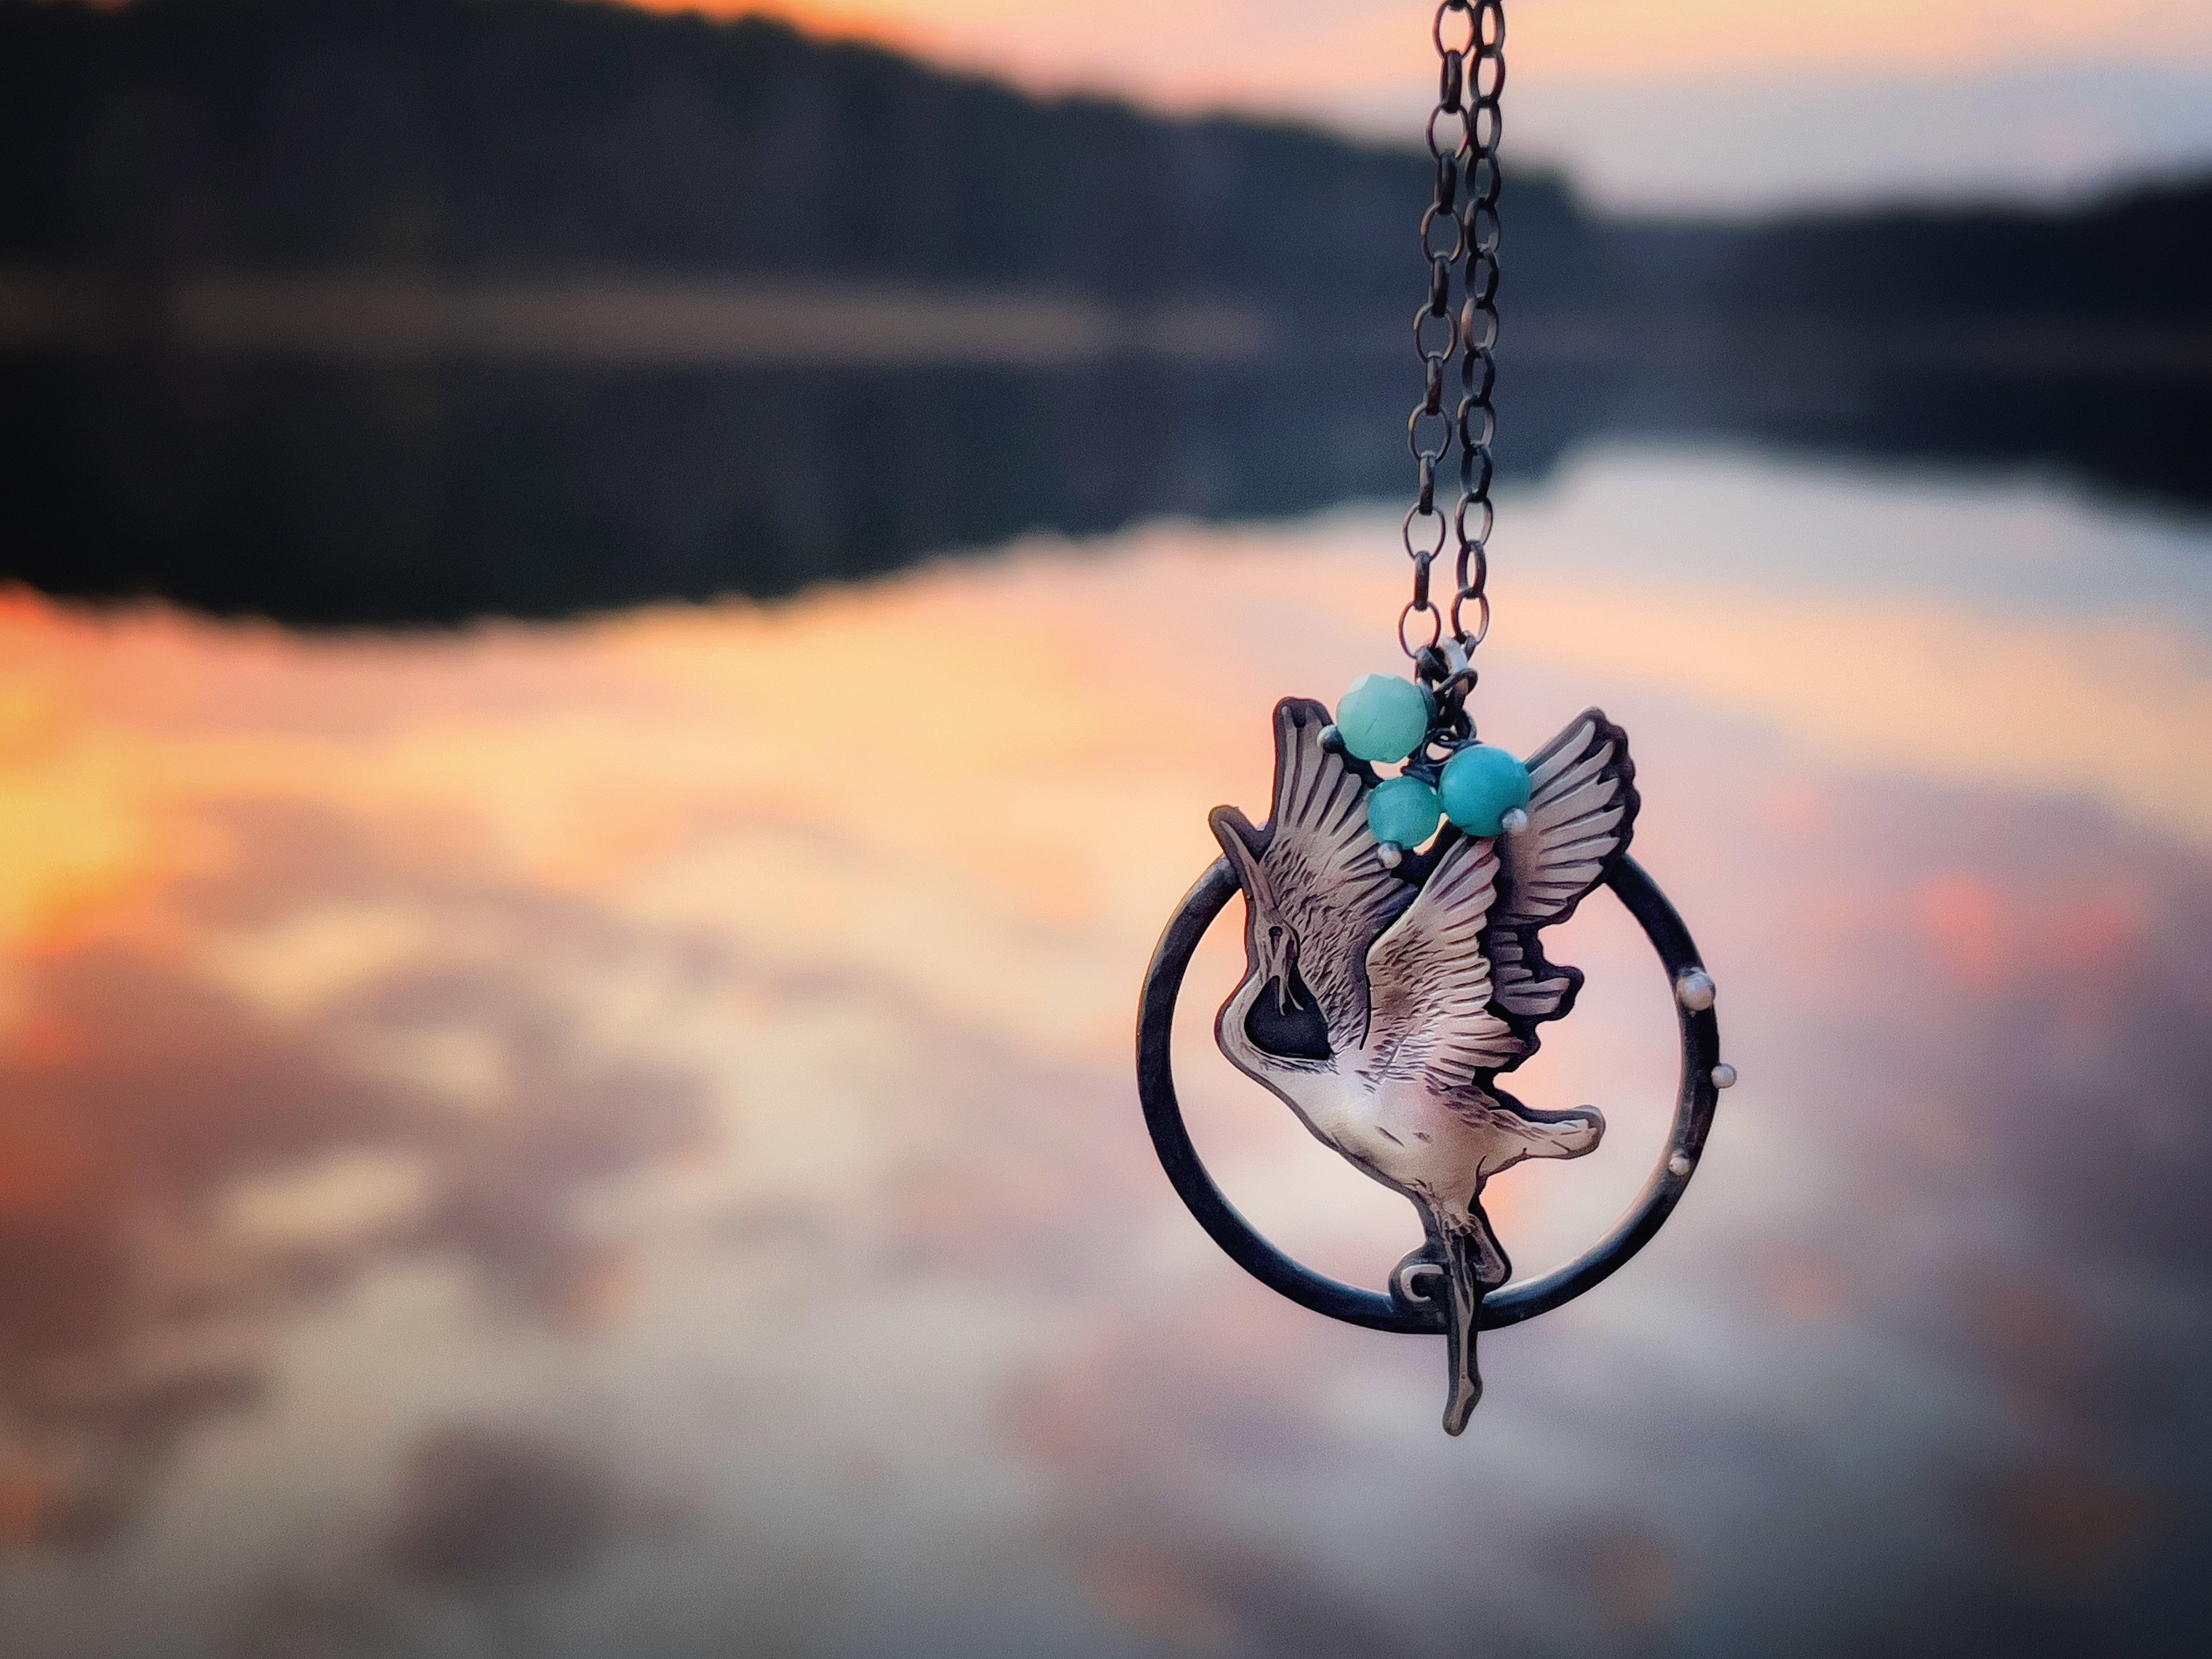 The Heron Necklace